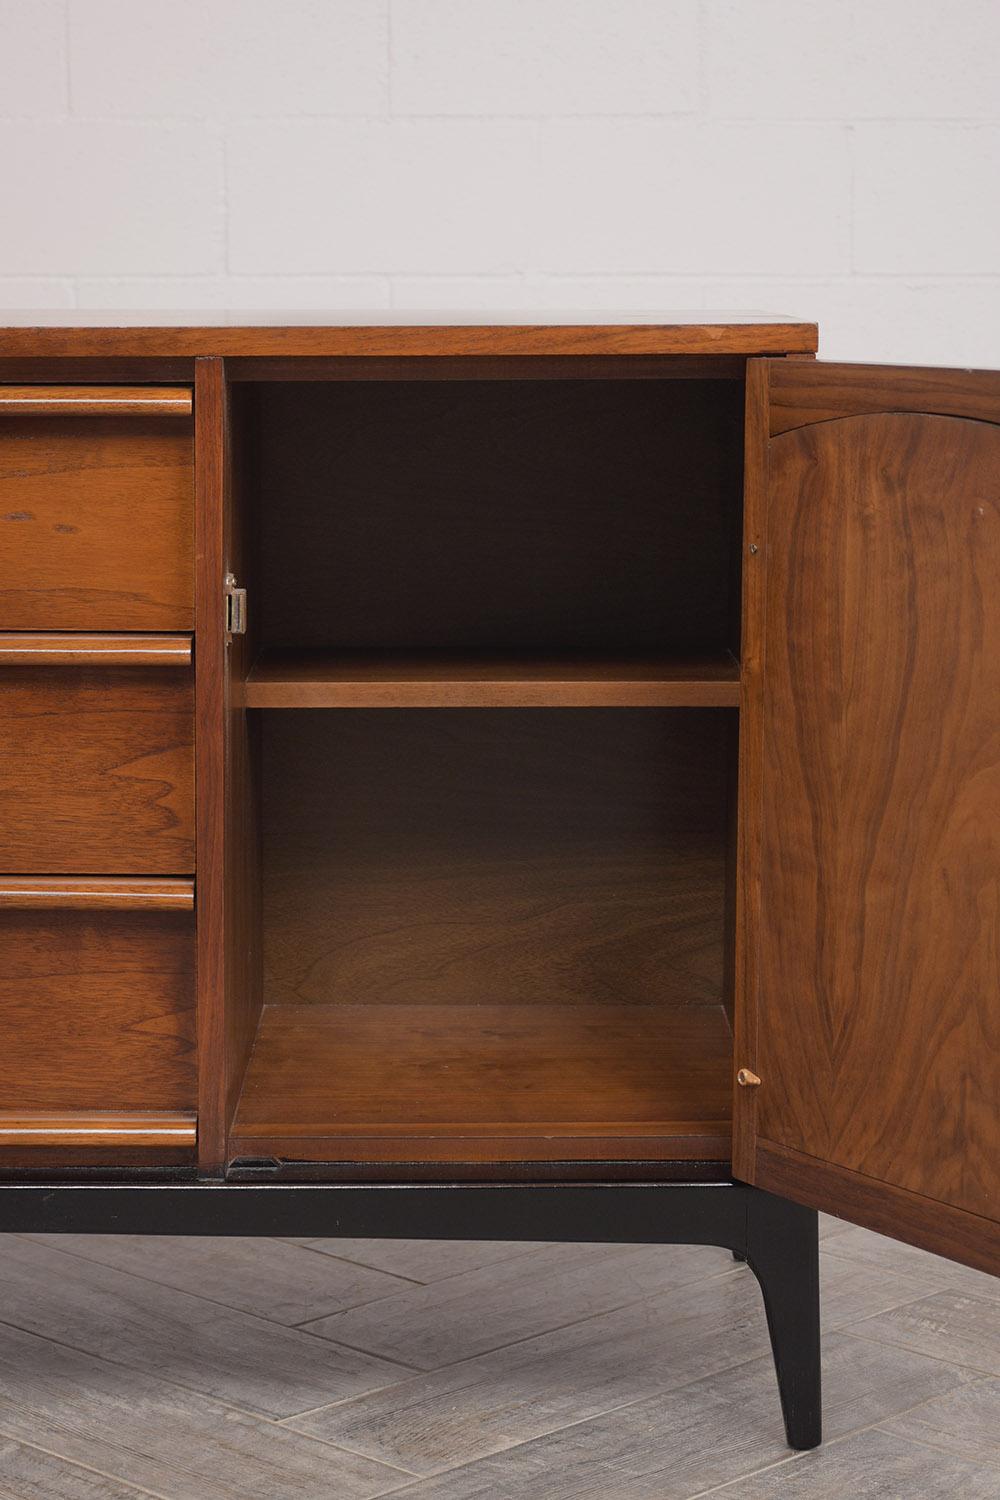 Beautiful 1960s modern walnut credenza, its been stained in a rich walnut and black color combination with lacquer finish. Comes with two doors decorated with a cane panel on each side of the piece, combined with 3 long drawers ,resting on stylish